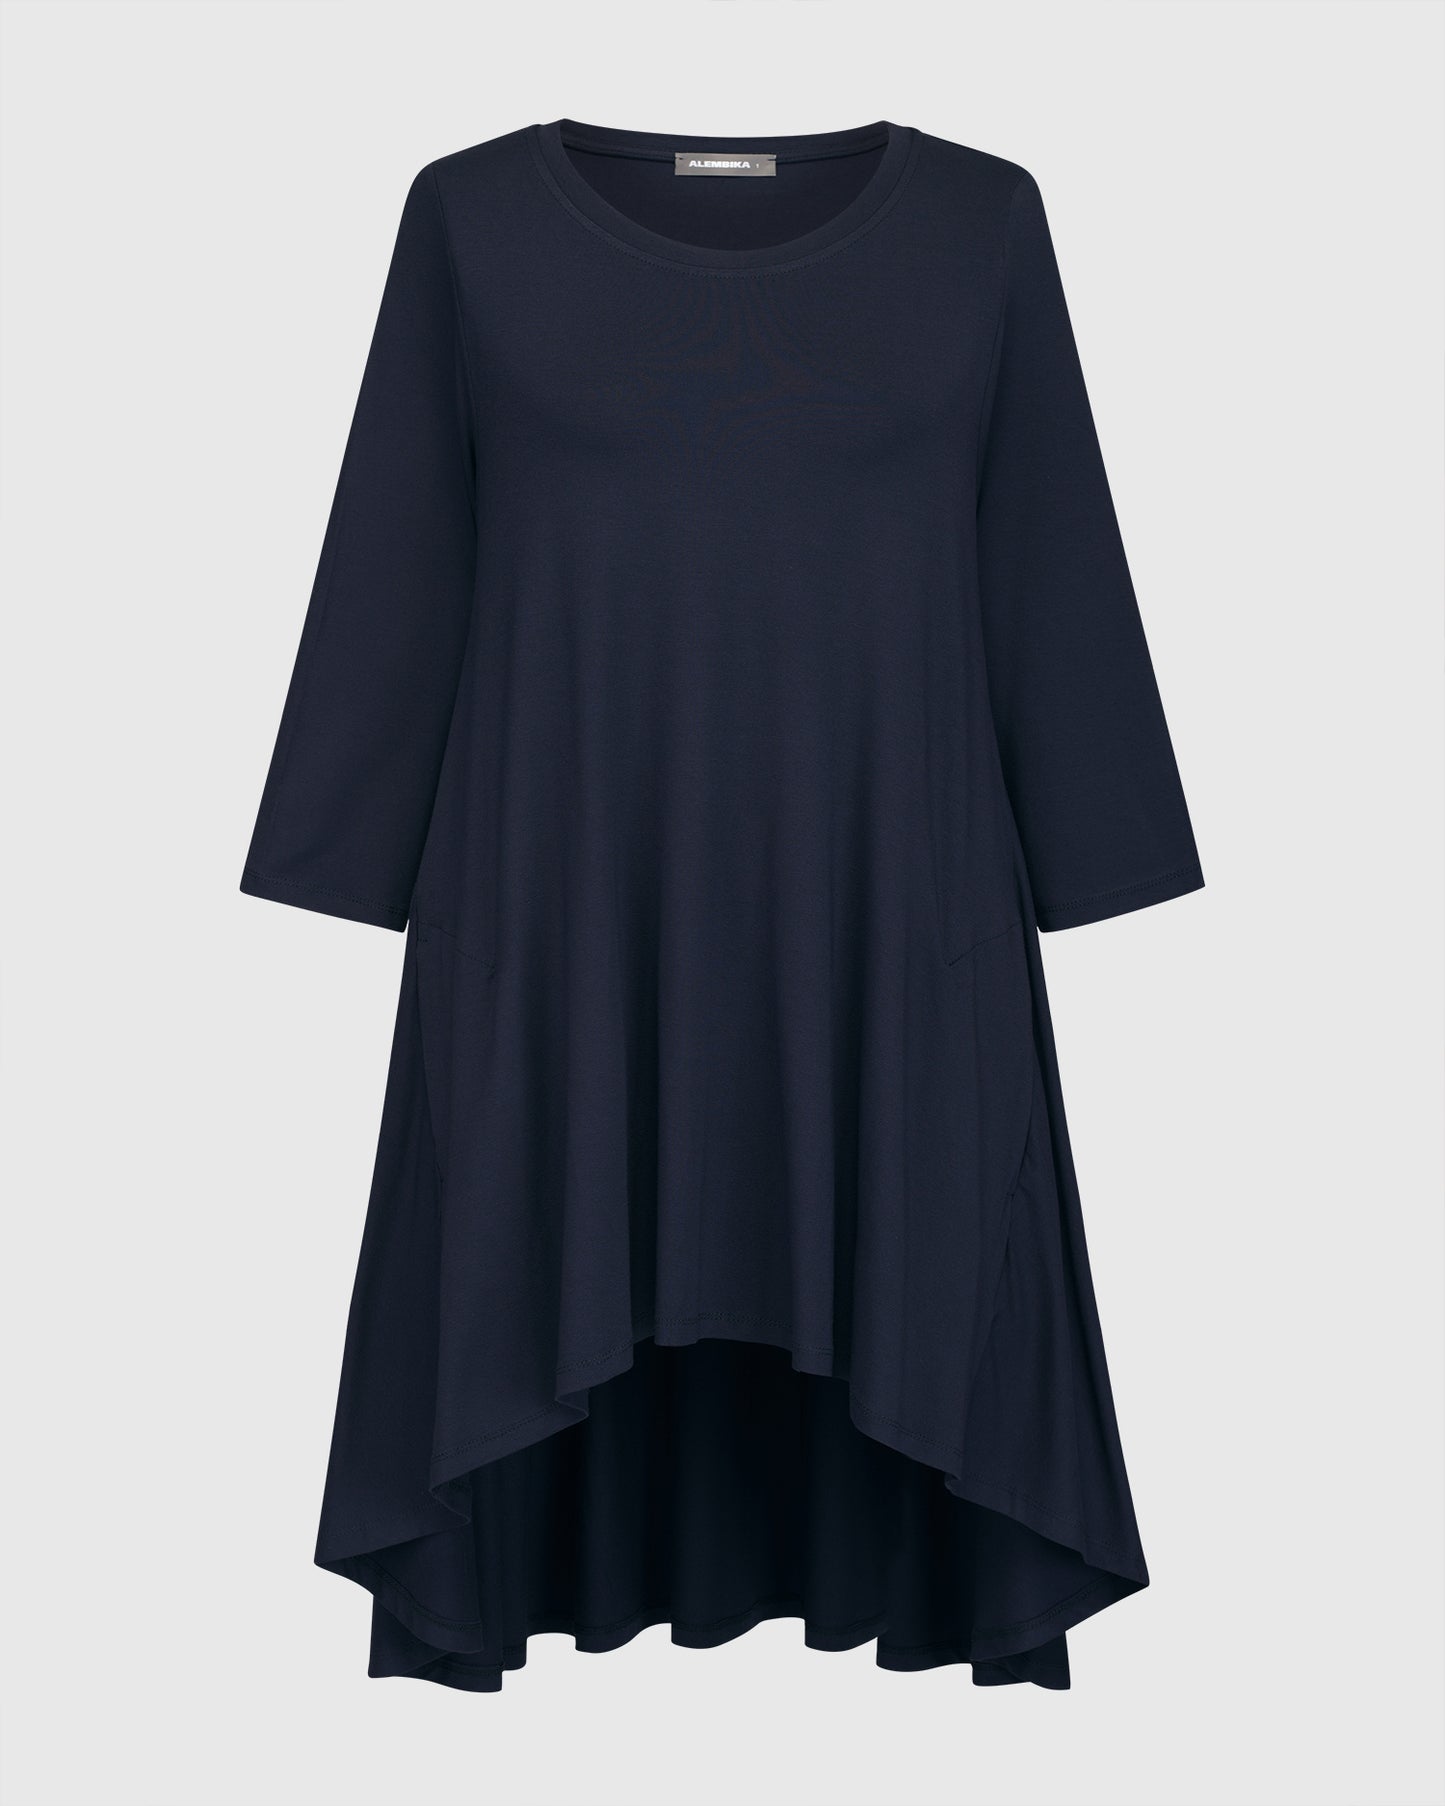 Essential Swing Tunic Top, Navy By Alembika